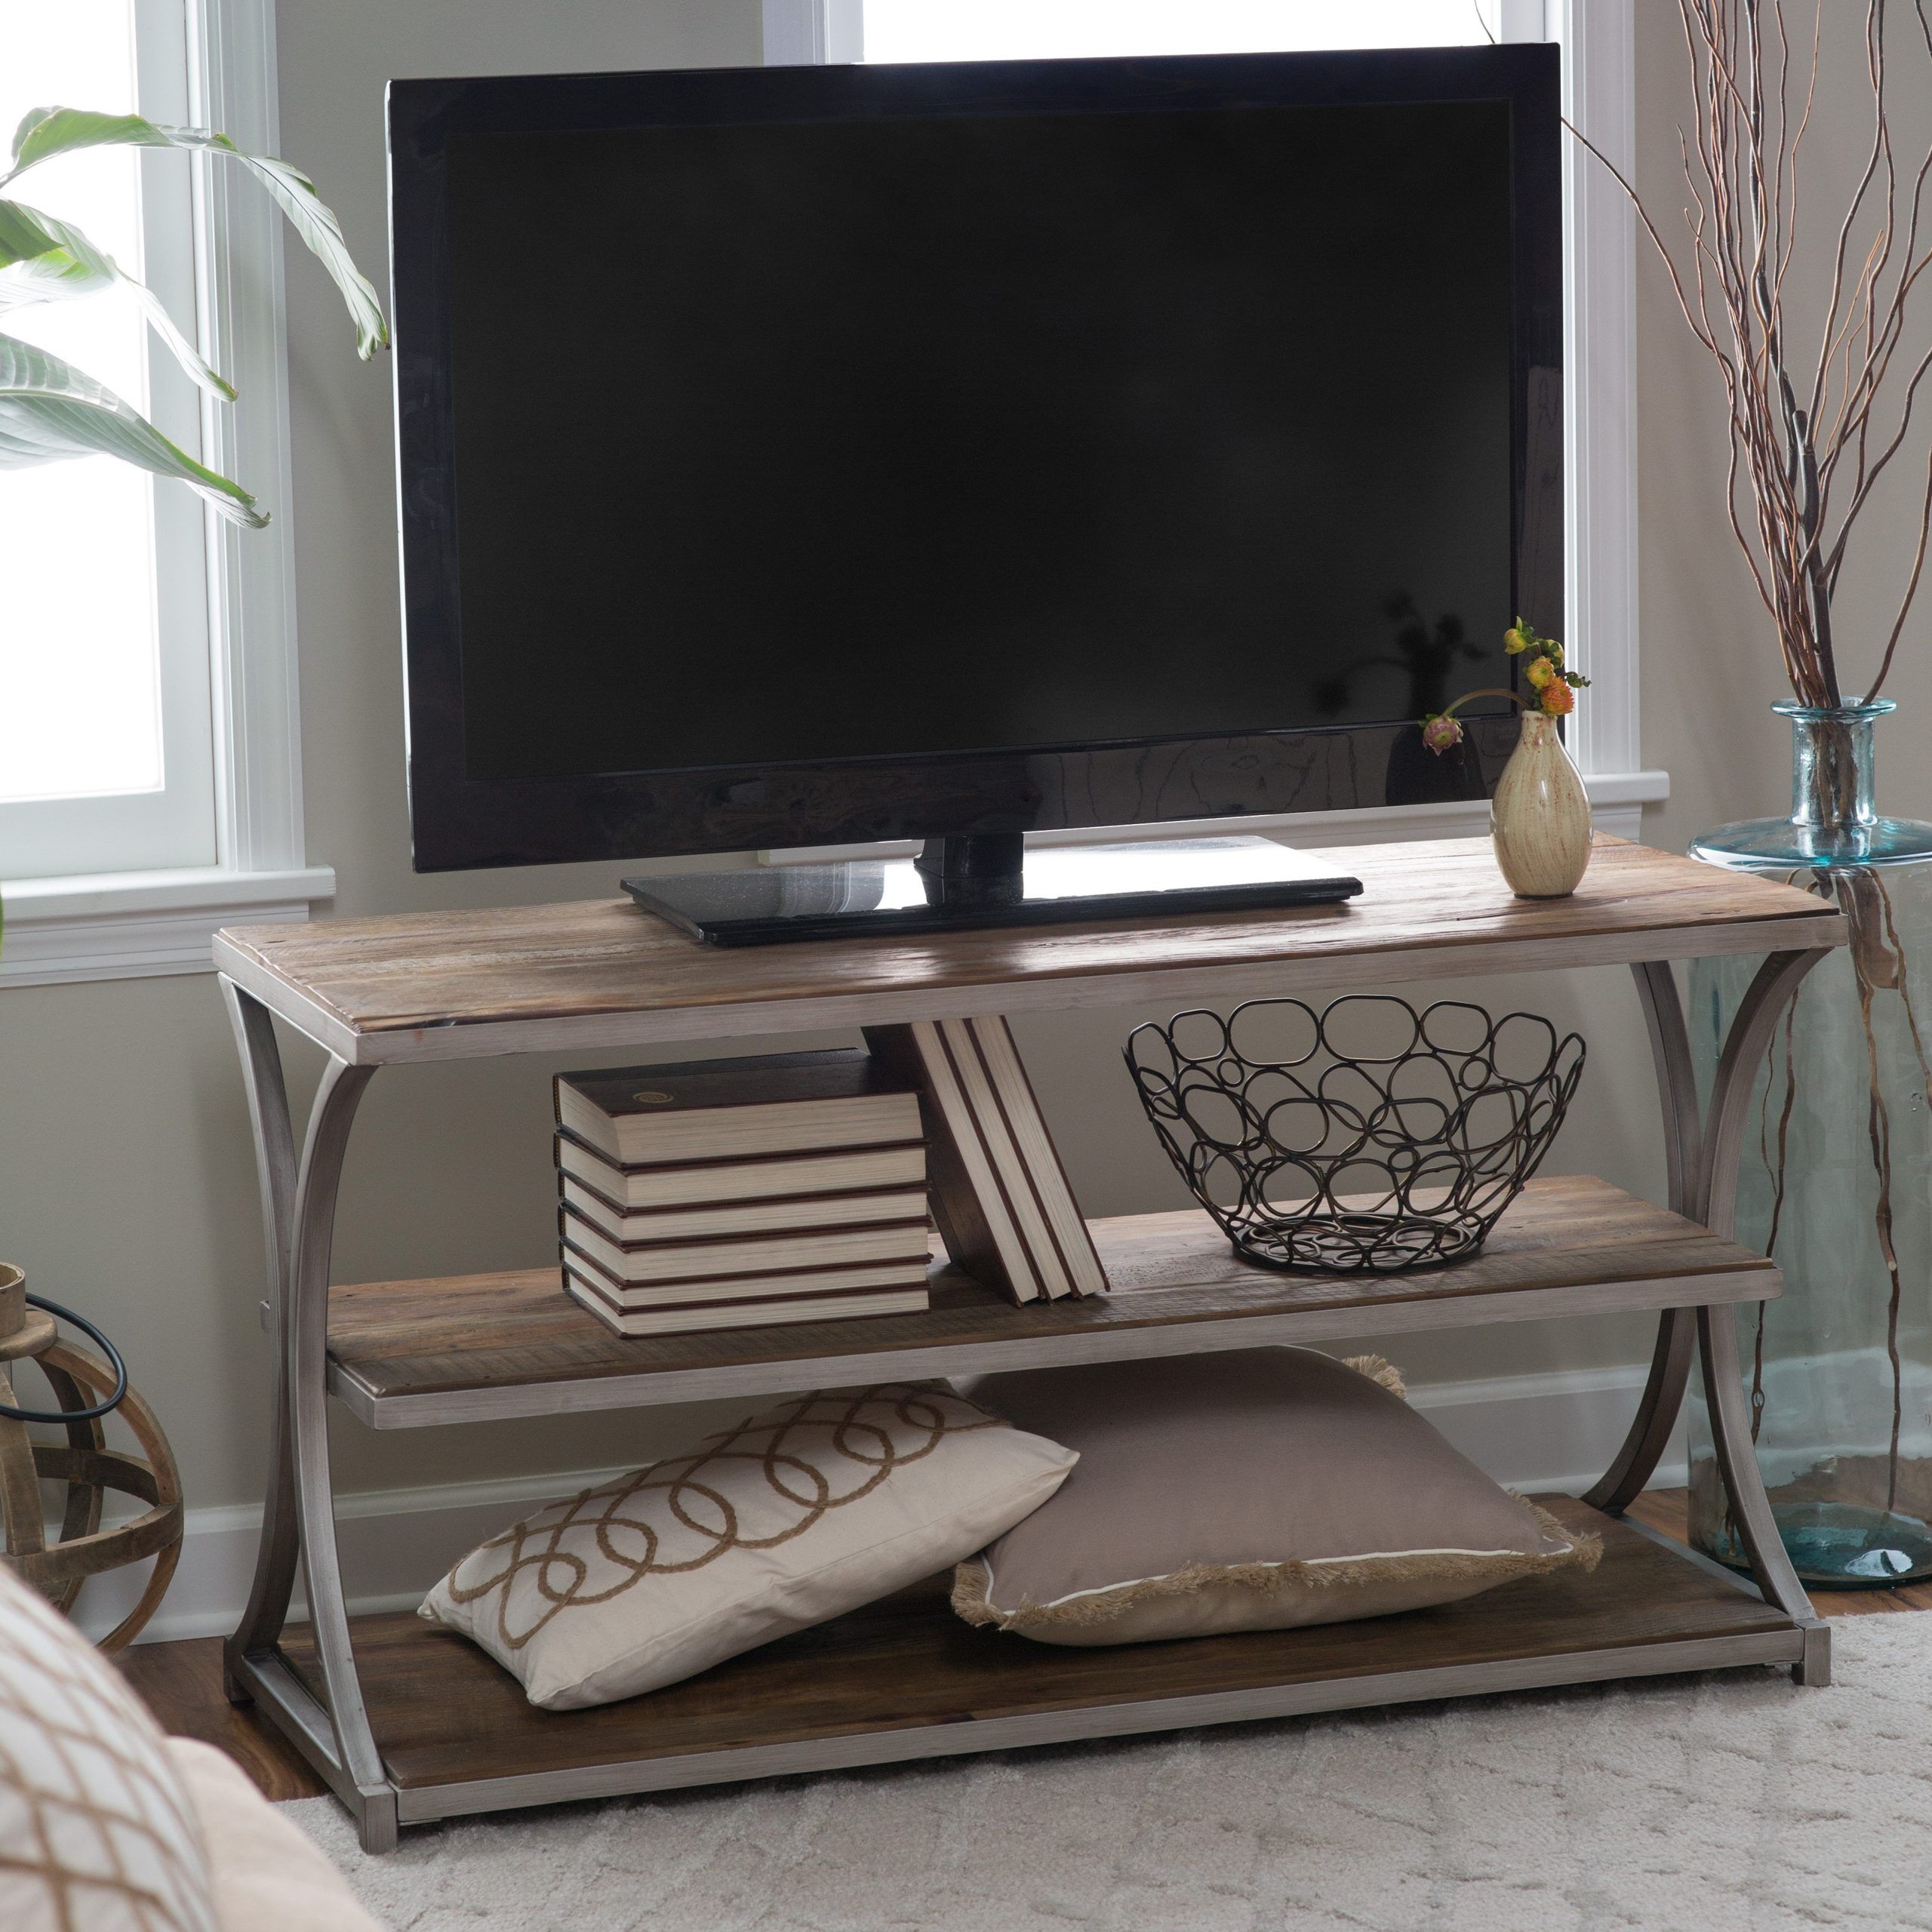 Belham Living Edison Reclaimed Wood Tv Stand – Tv Stands Intended For Reclaimed Wood And Metal Tv Stands (View 2 of 15)